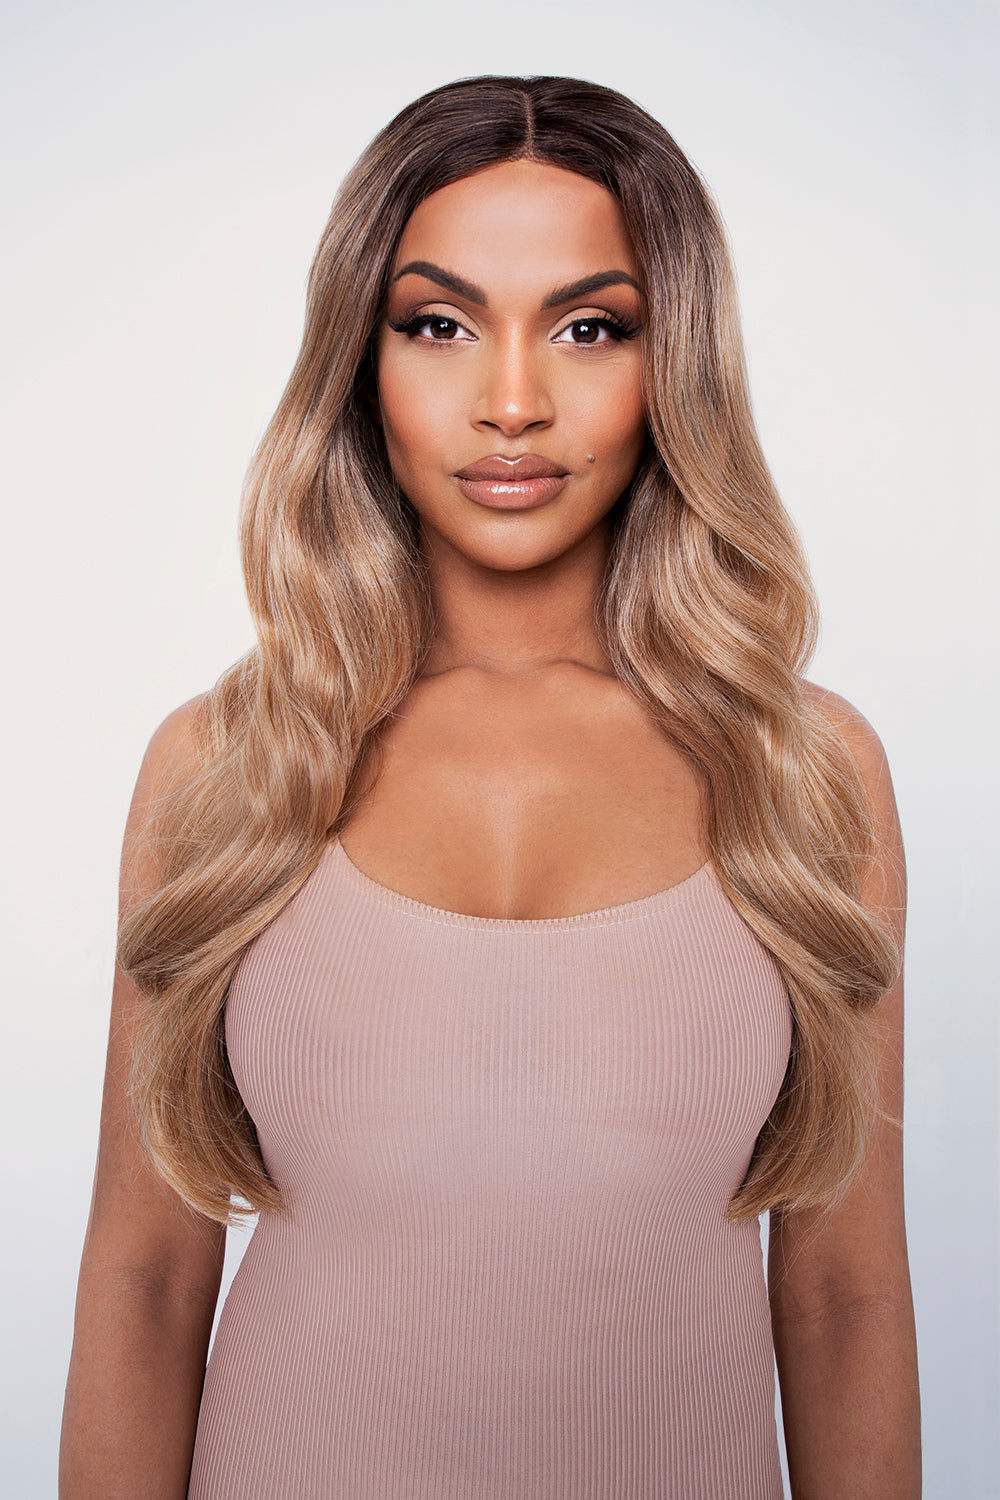 The Ciara - Perruque Lace Front Balayage Blond Doré